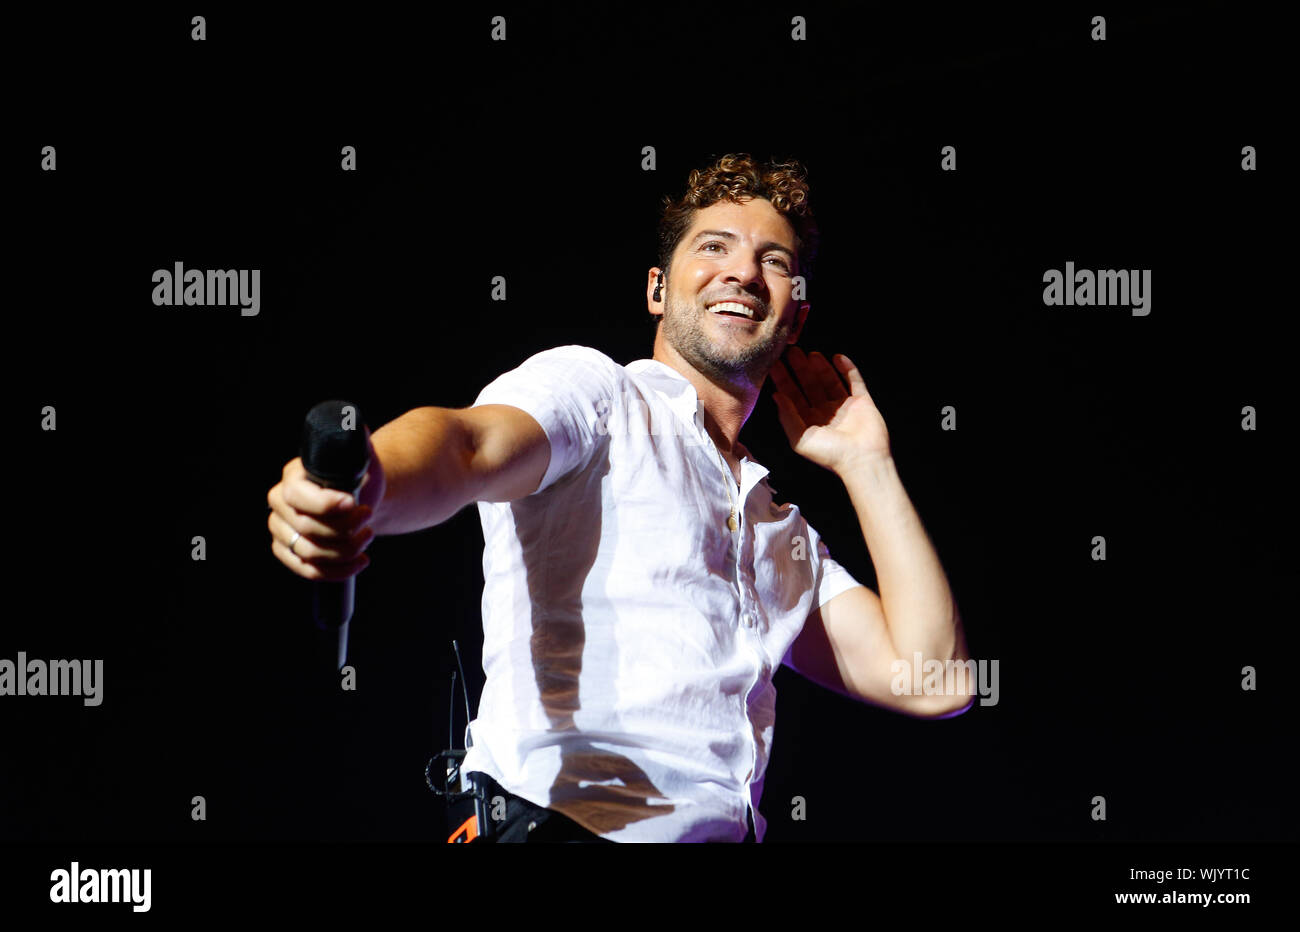 Calvia, Mallorca / Spain- August 31, 2019: Spanish singer David Bisbal performs live during his 2019 promotion tour near the village of Calvia in the Stock Photo